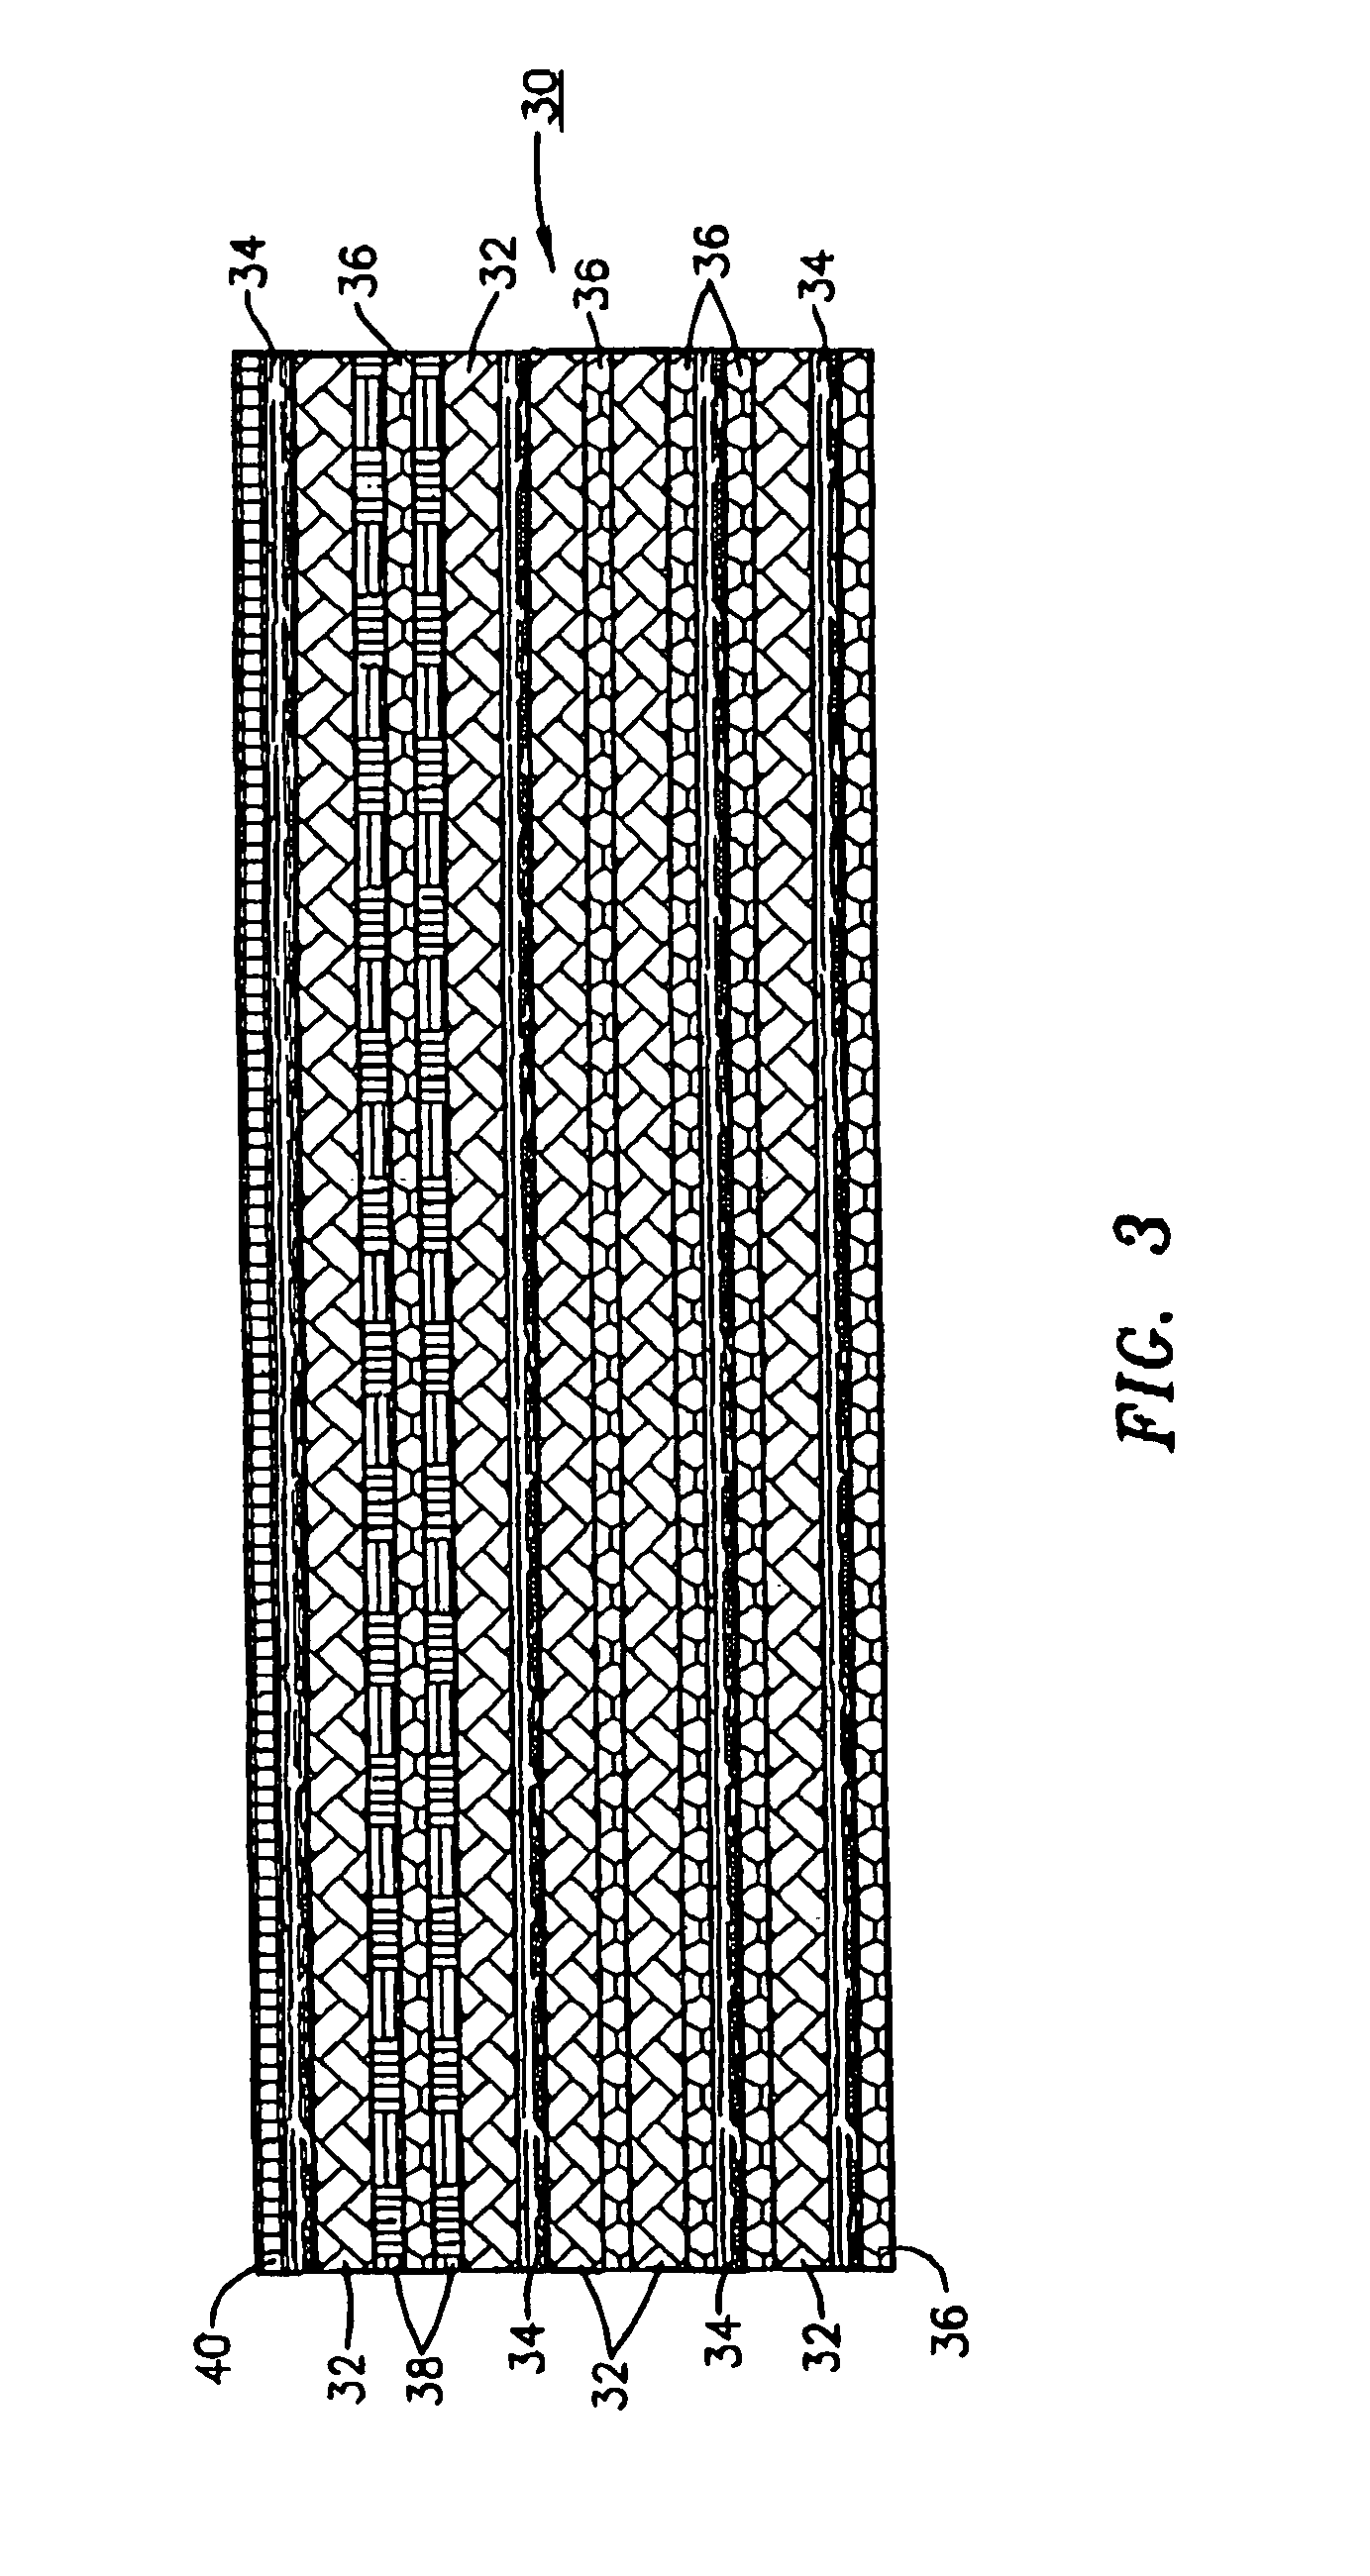 Ballistic/impact resistant foamed composites and method for their manufacture